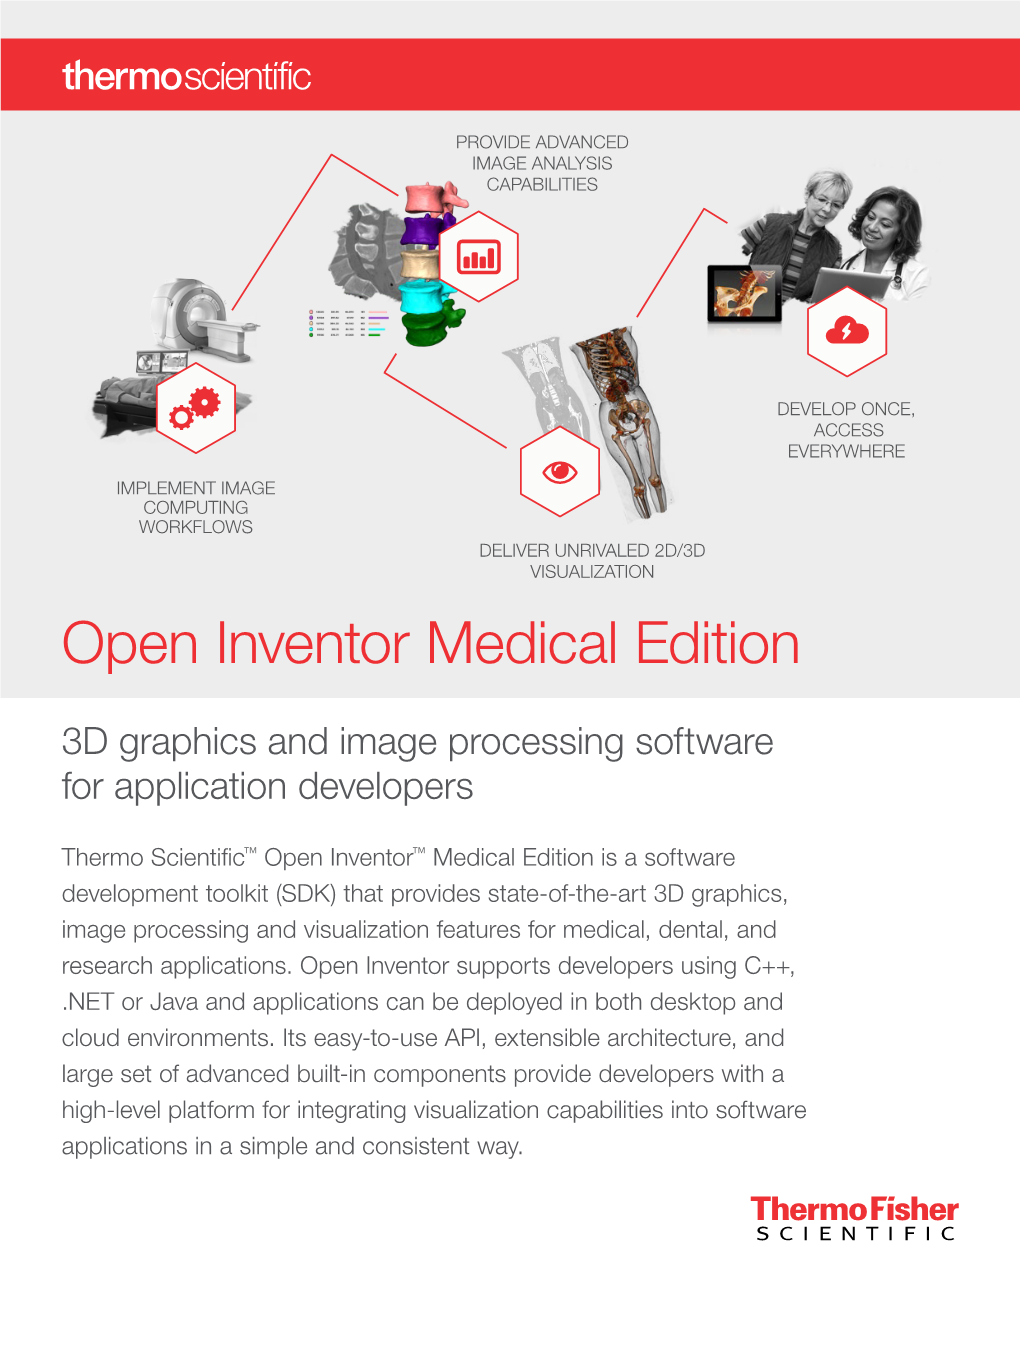 Open Inventor Medical Edition